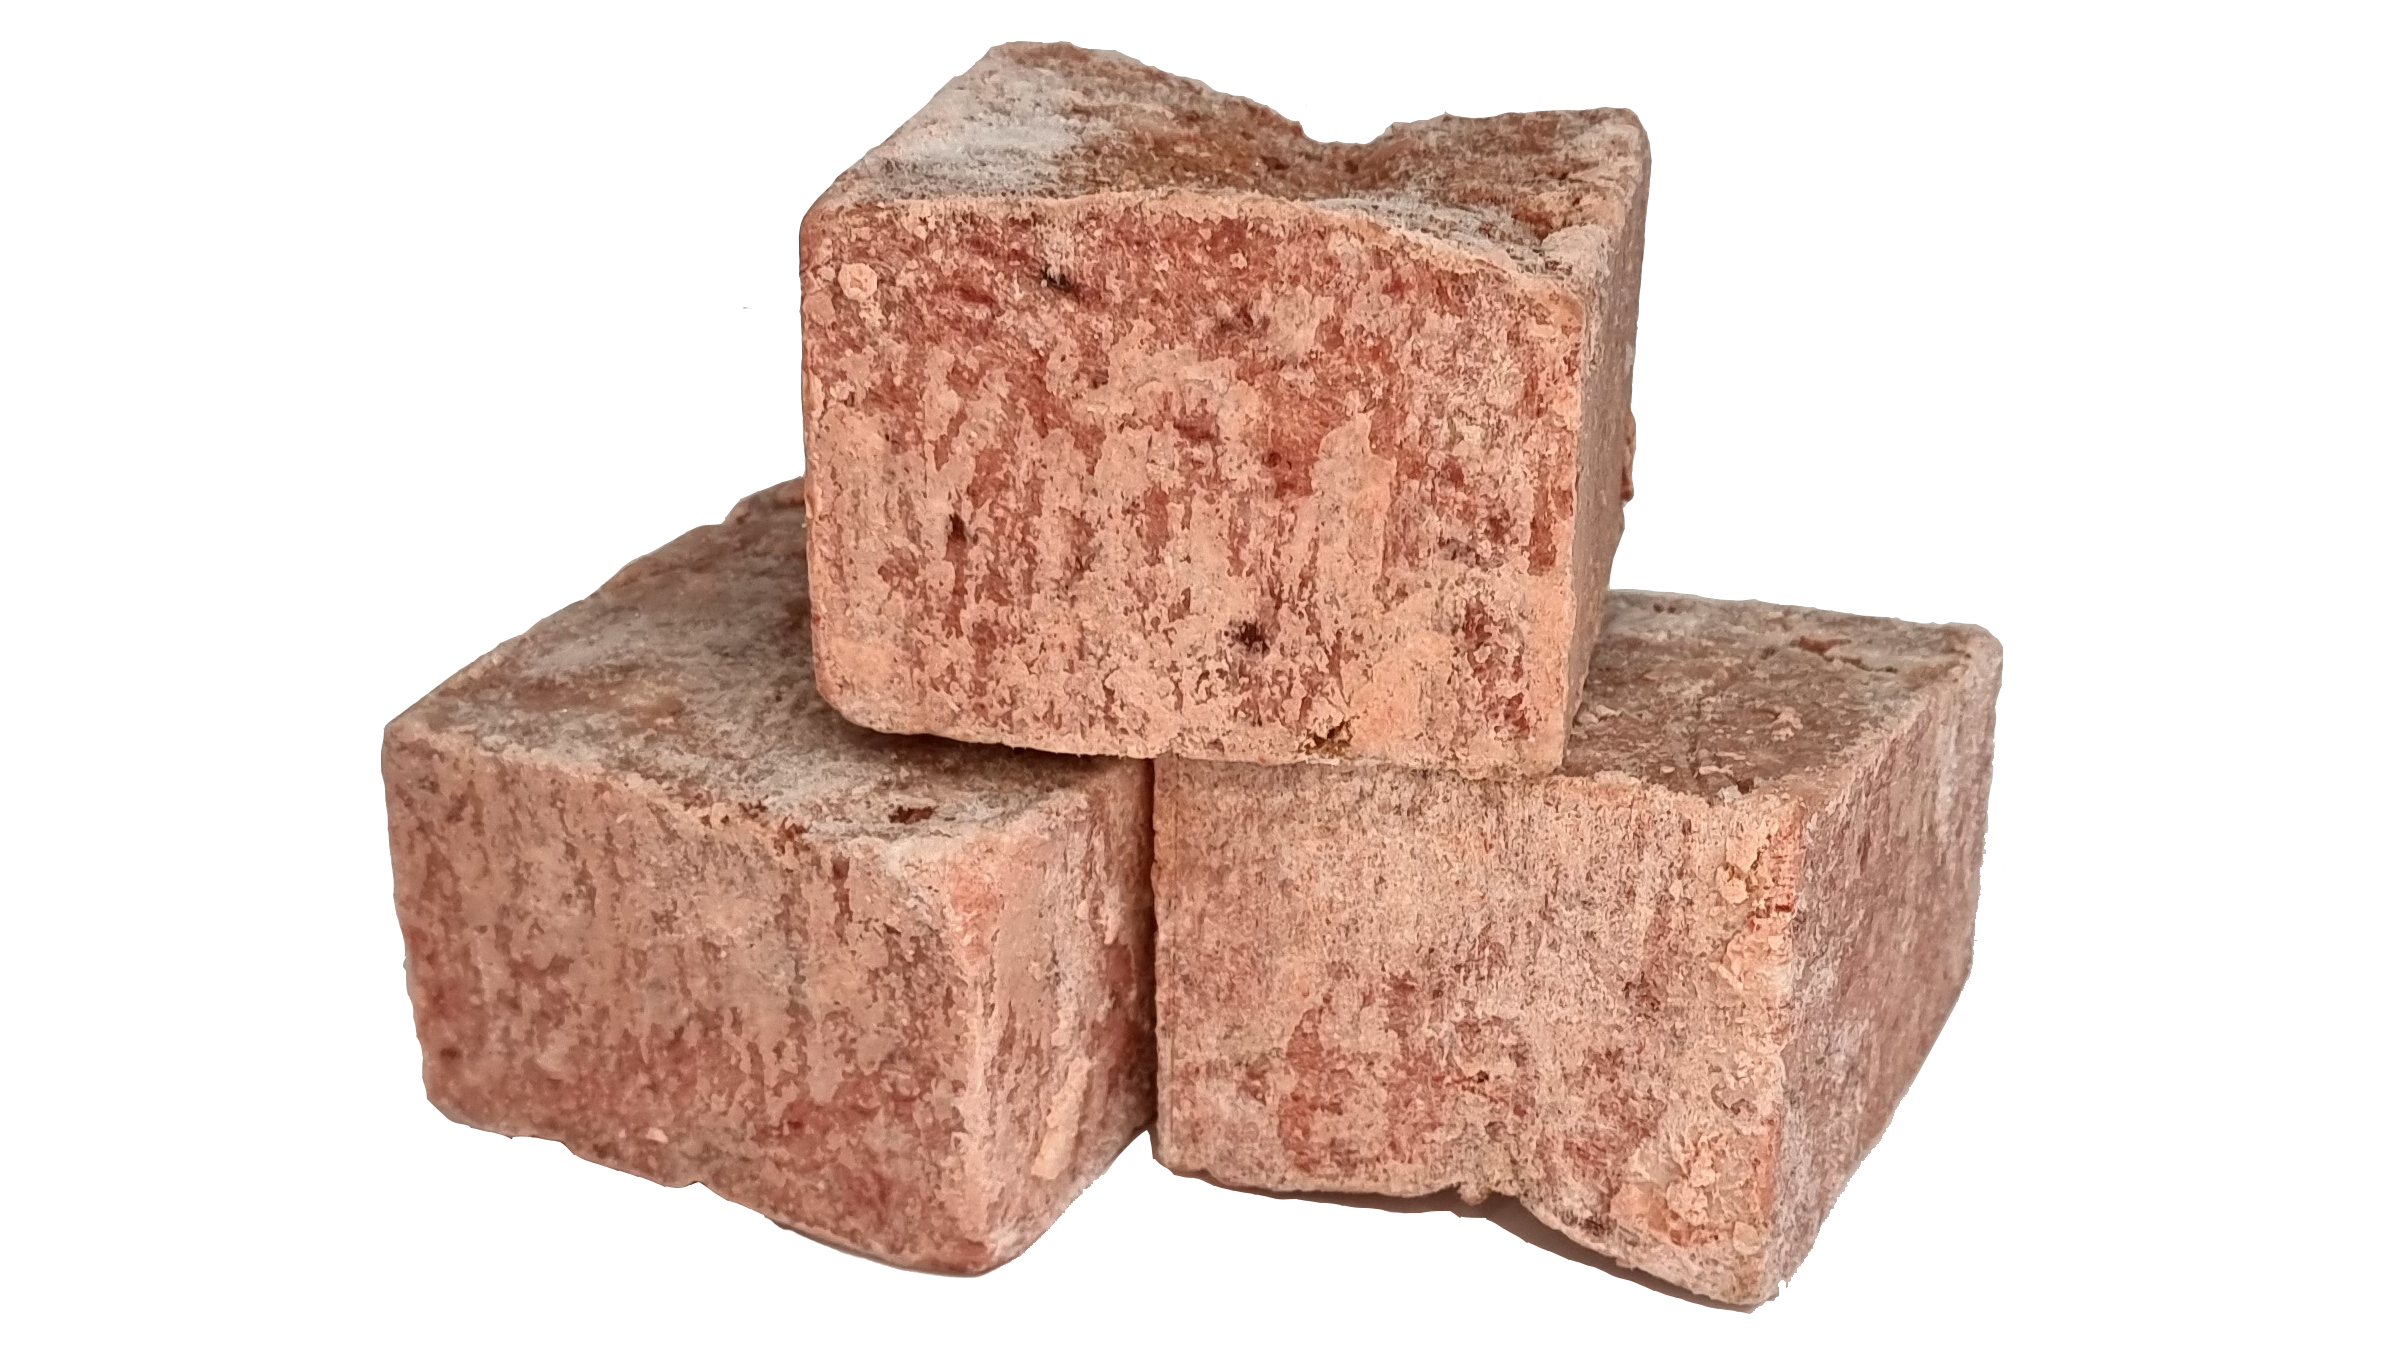 Turkey, Bone and Offal COMPLETE 5kgs (11lb)   12 x Small Blocks - Working Dog